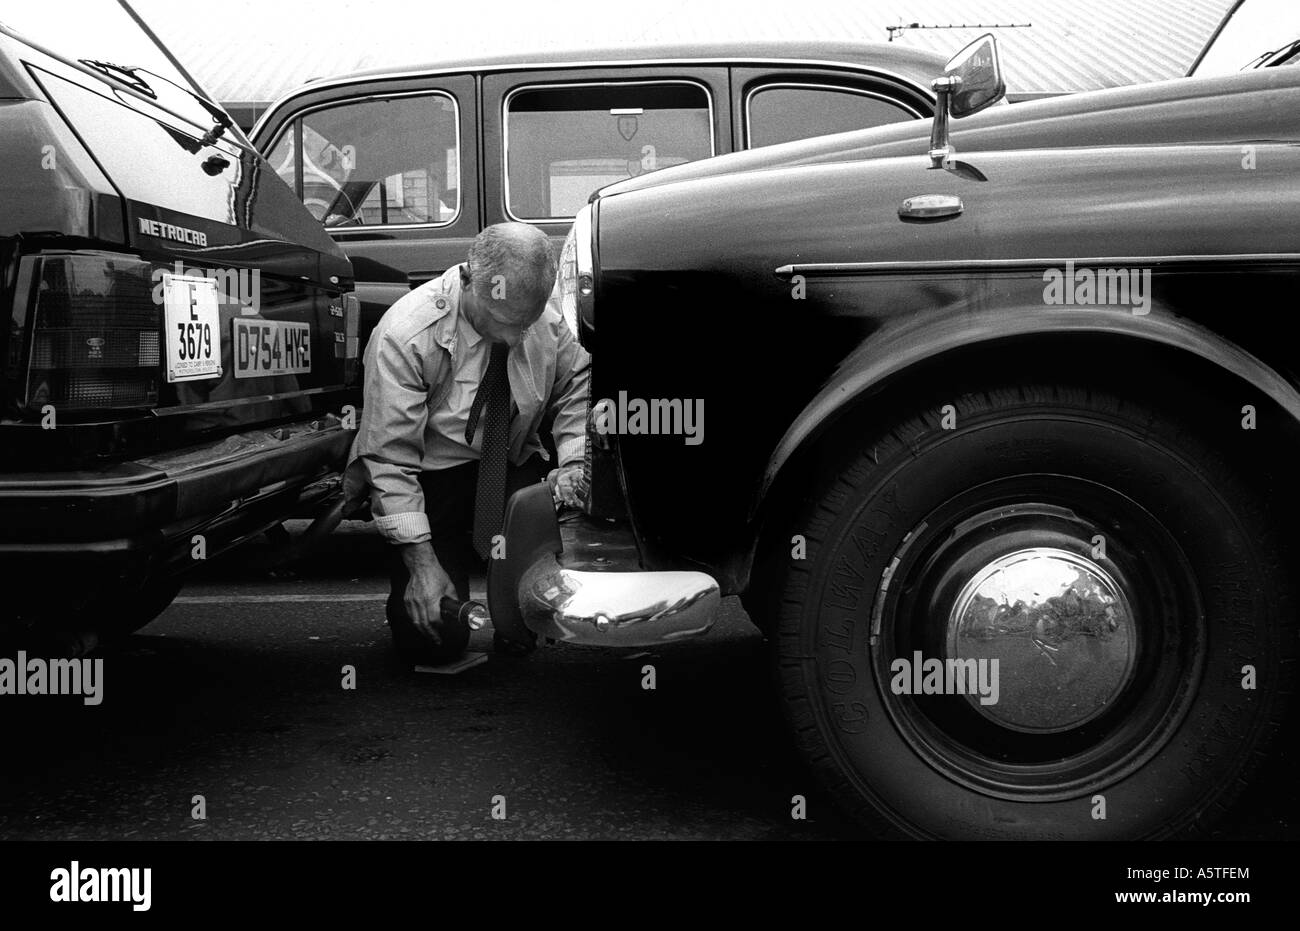 A Public Carriage Office inspector checking London taxis at Heathrow Airport. Stock Photo